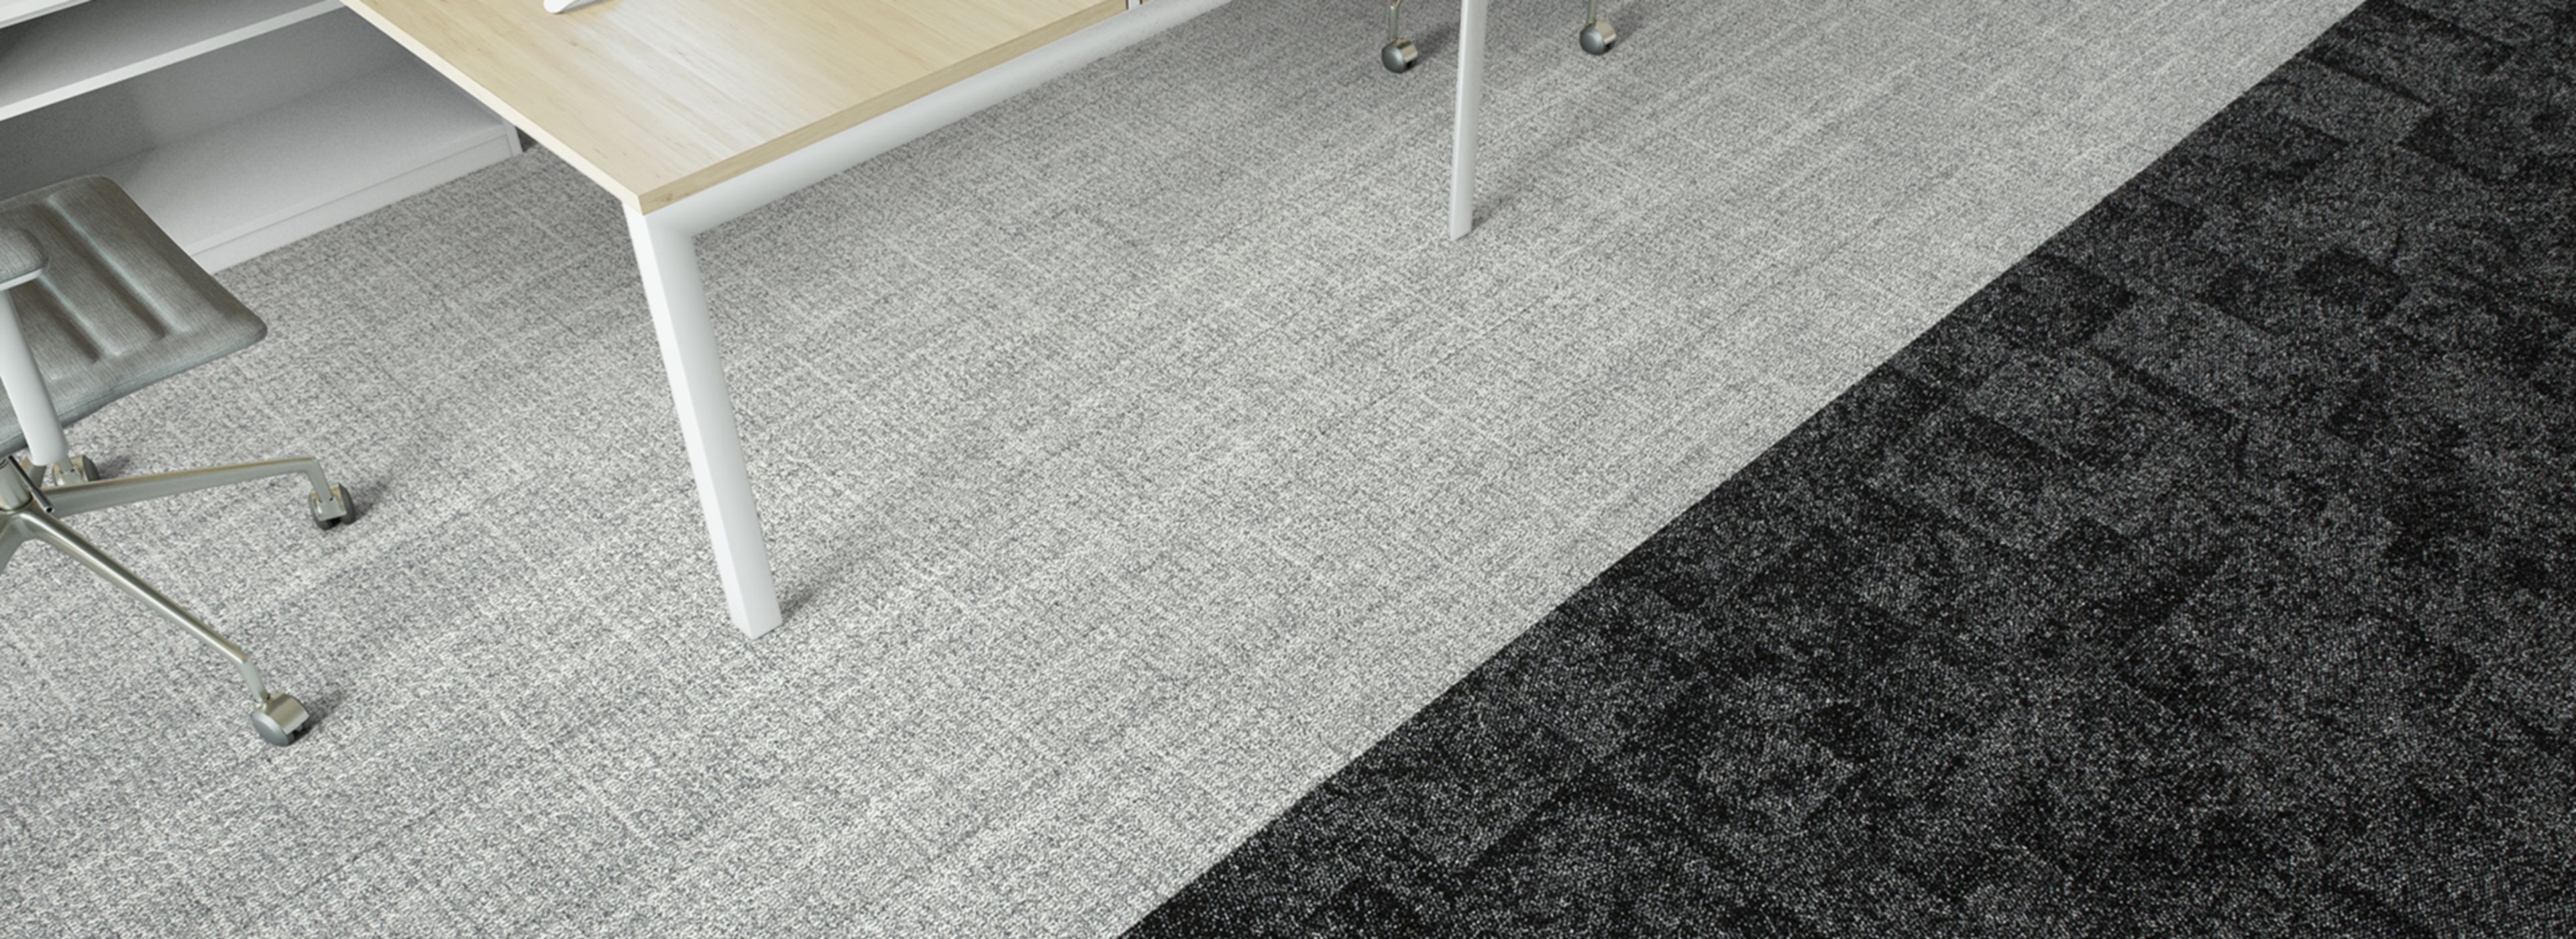 image Interface Open Air 401 plank carpet tile in floor view with wood top work desk numéro 1